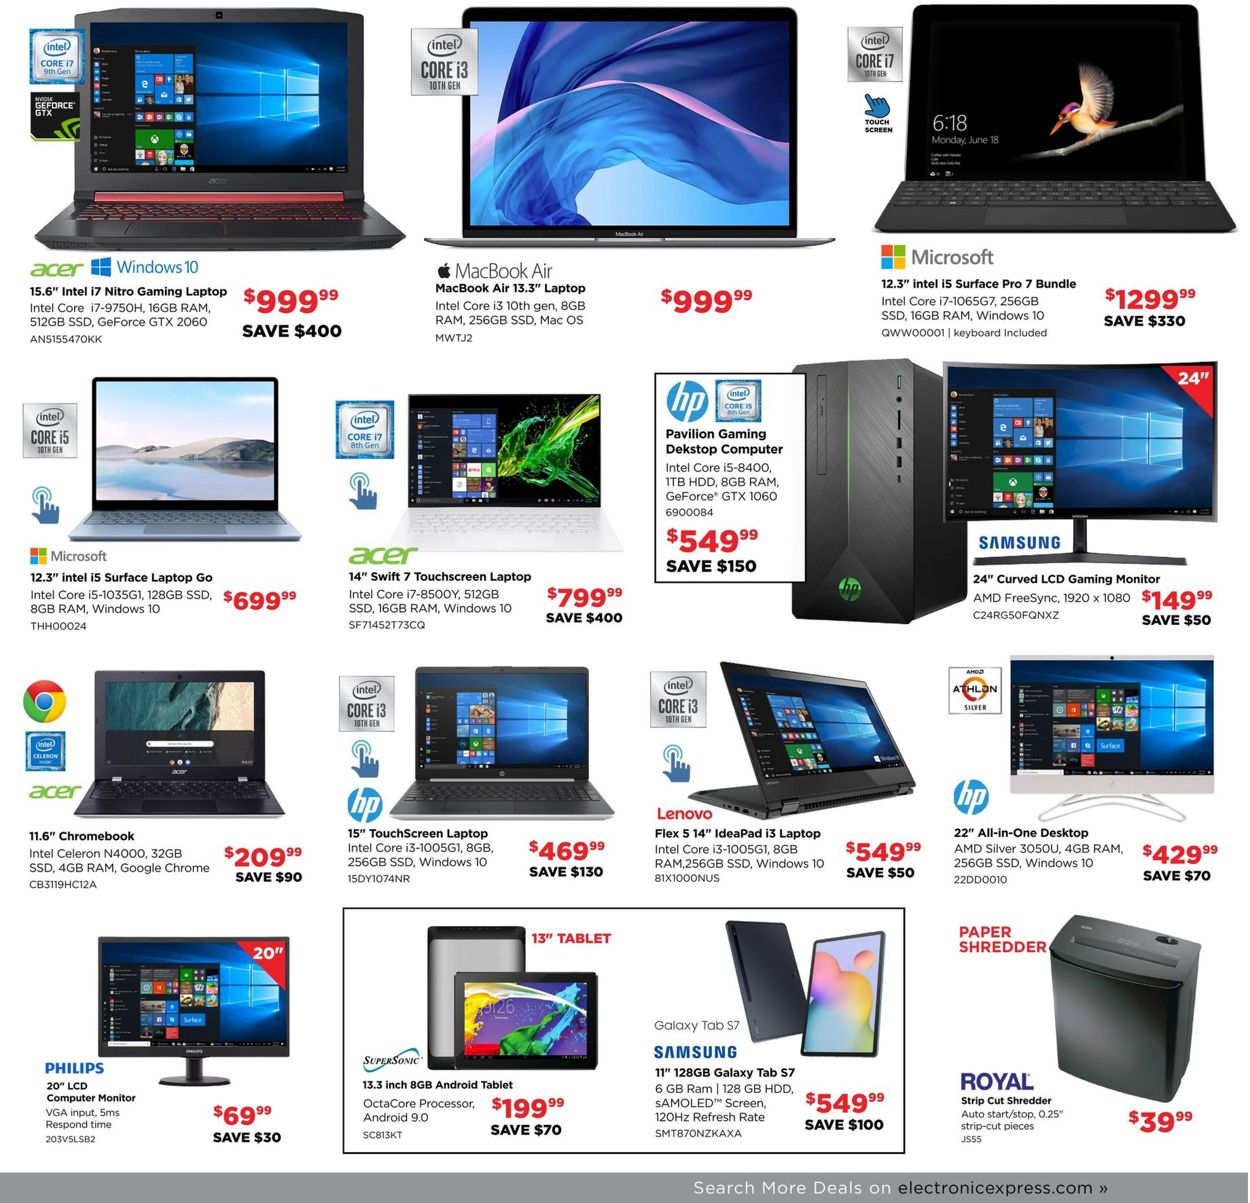 Catalogue Electronic Express Black Friday 2020 from 11/15/2020